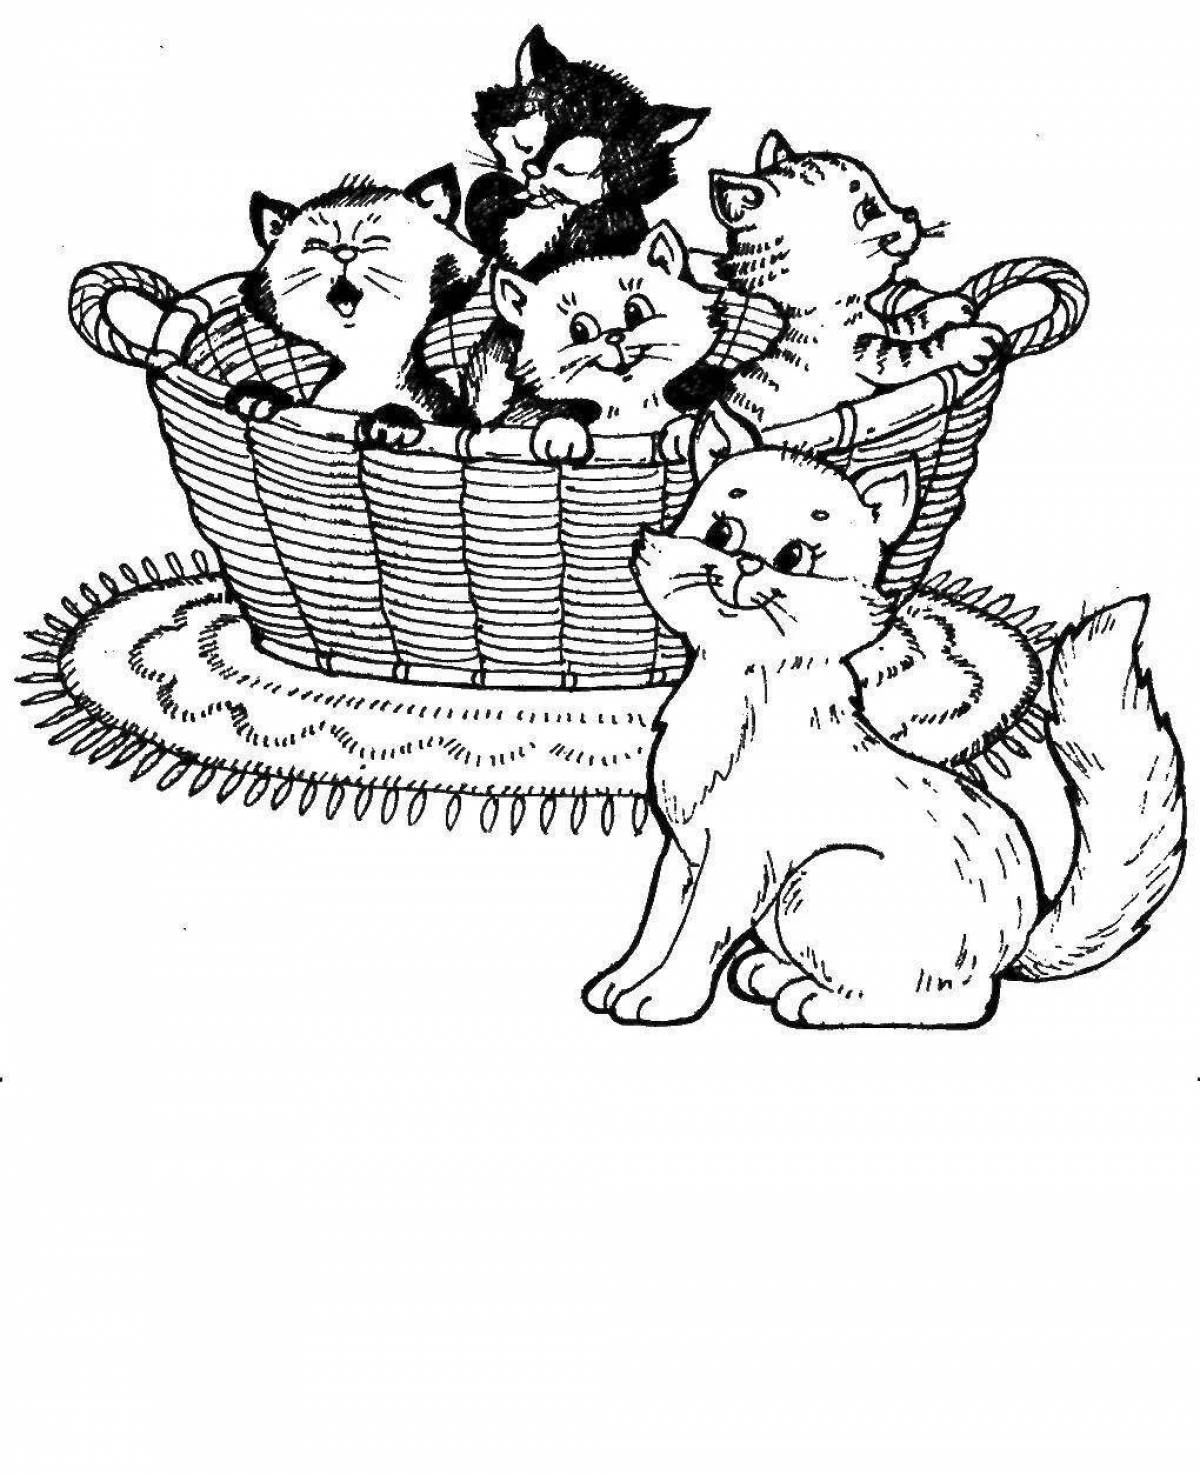 Bright kittens in a basket